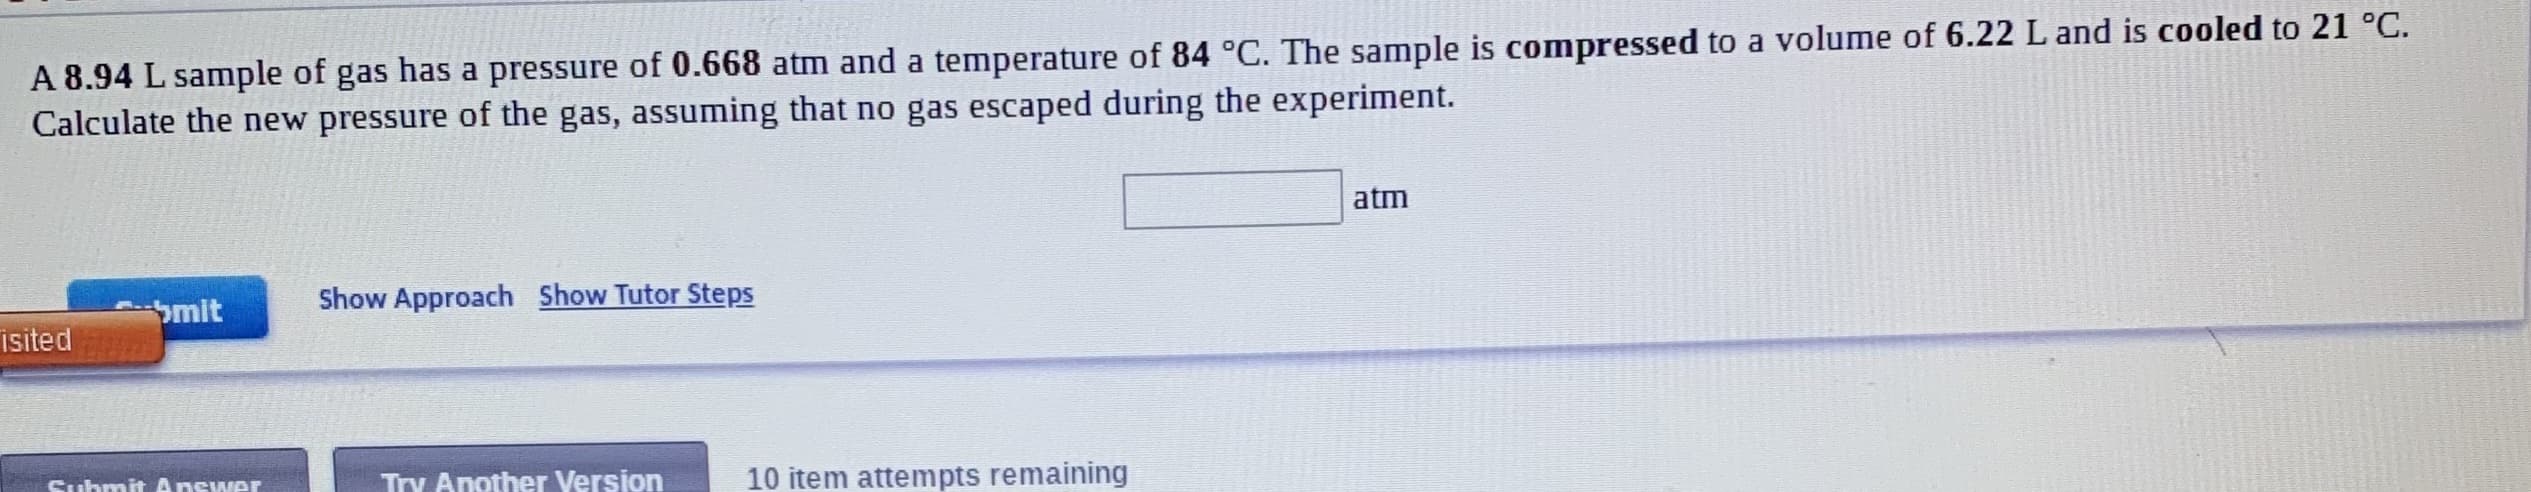 A 8.94 L sample of gas has a pressure of 0.668 atm and a temperature of 84 °C. The sample is compressed to a volume of 6.22 L and is cooled to 21 °C.
Calculate the new pressure of the gas, assuming that no gas escaped during the experiment.
atm
Show Approach Show Tutor Steps
Smit
isited
Suhmit Answer
Try Another Version
10 item attempts remaining
